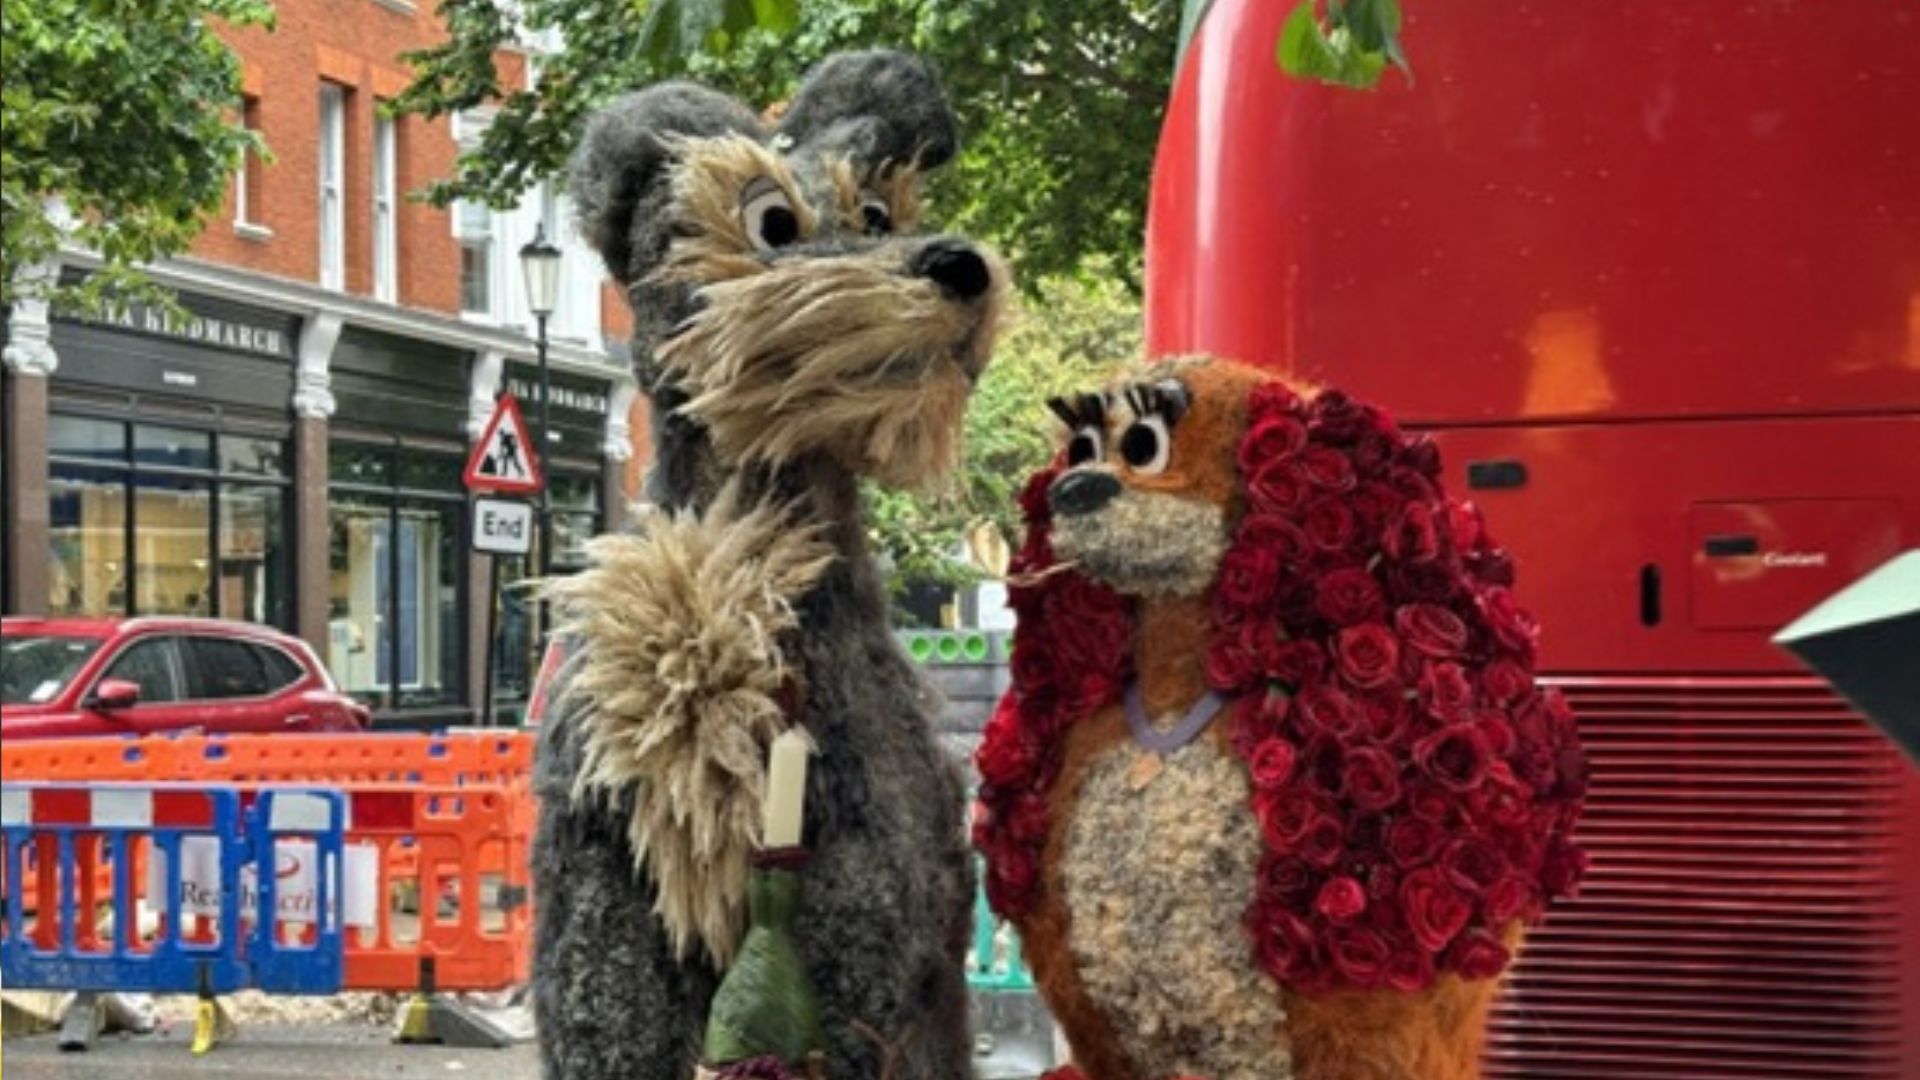 A flower display featuring Lady and the Tramp in Chelsea, Central London during Chelsea in Bloom. /CGTN
